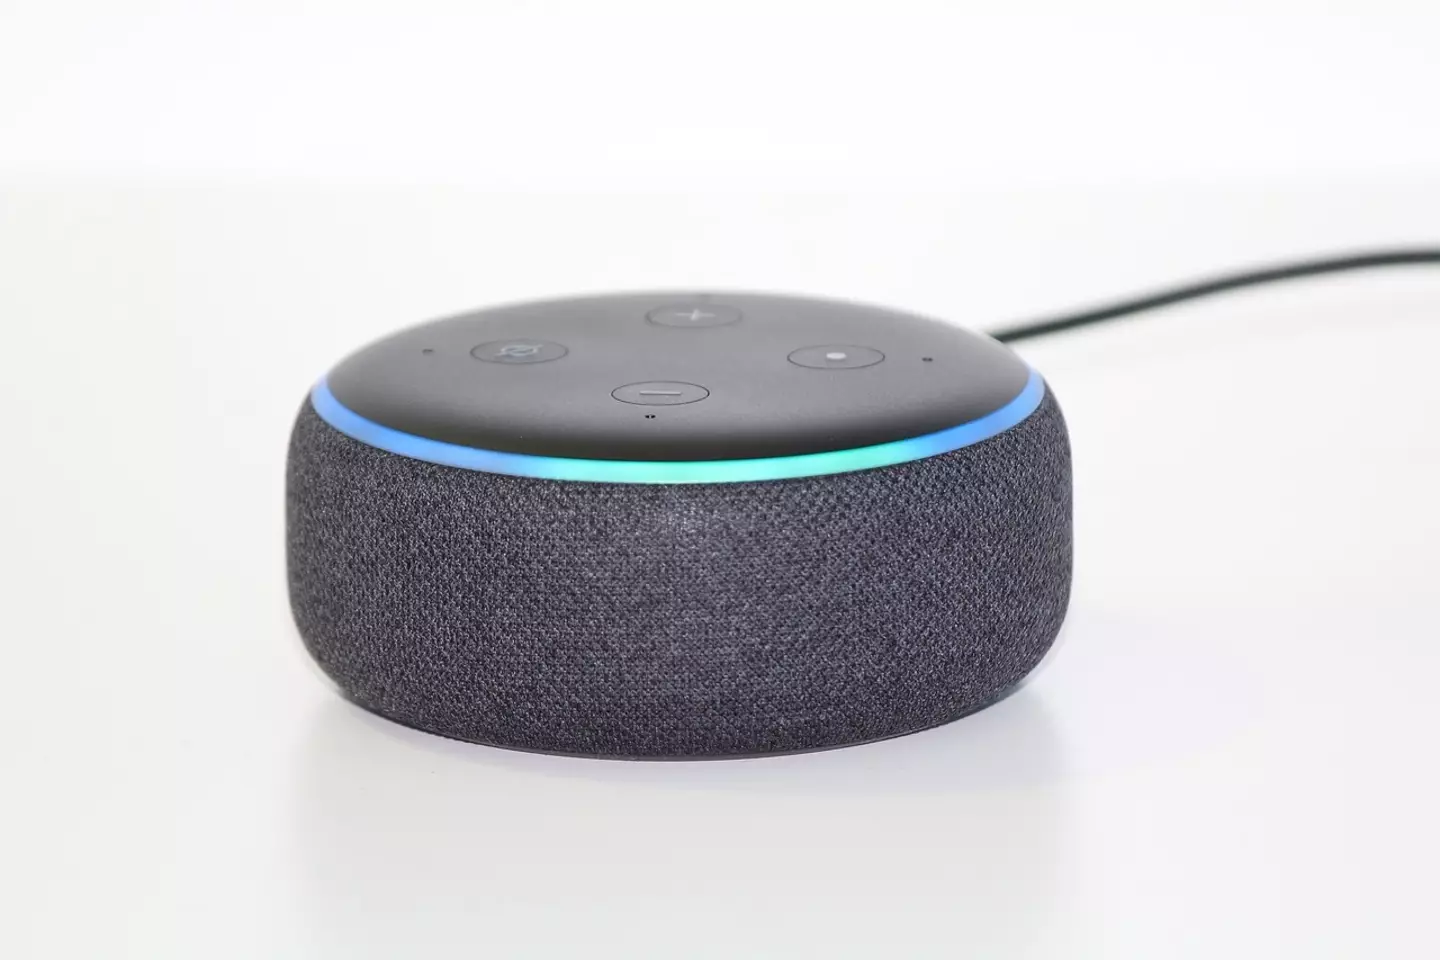 You can access a 'Super Alexa' mode with an old school hack.